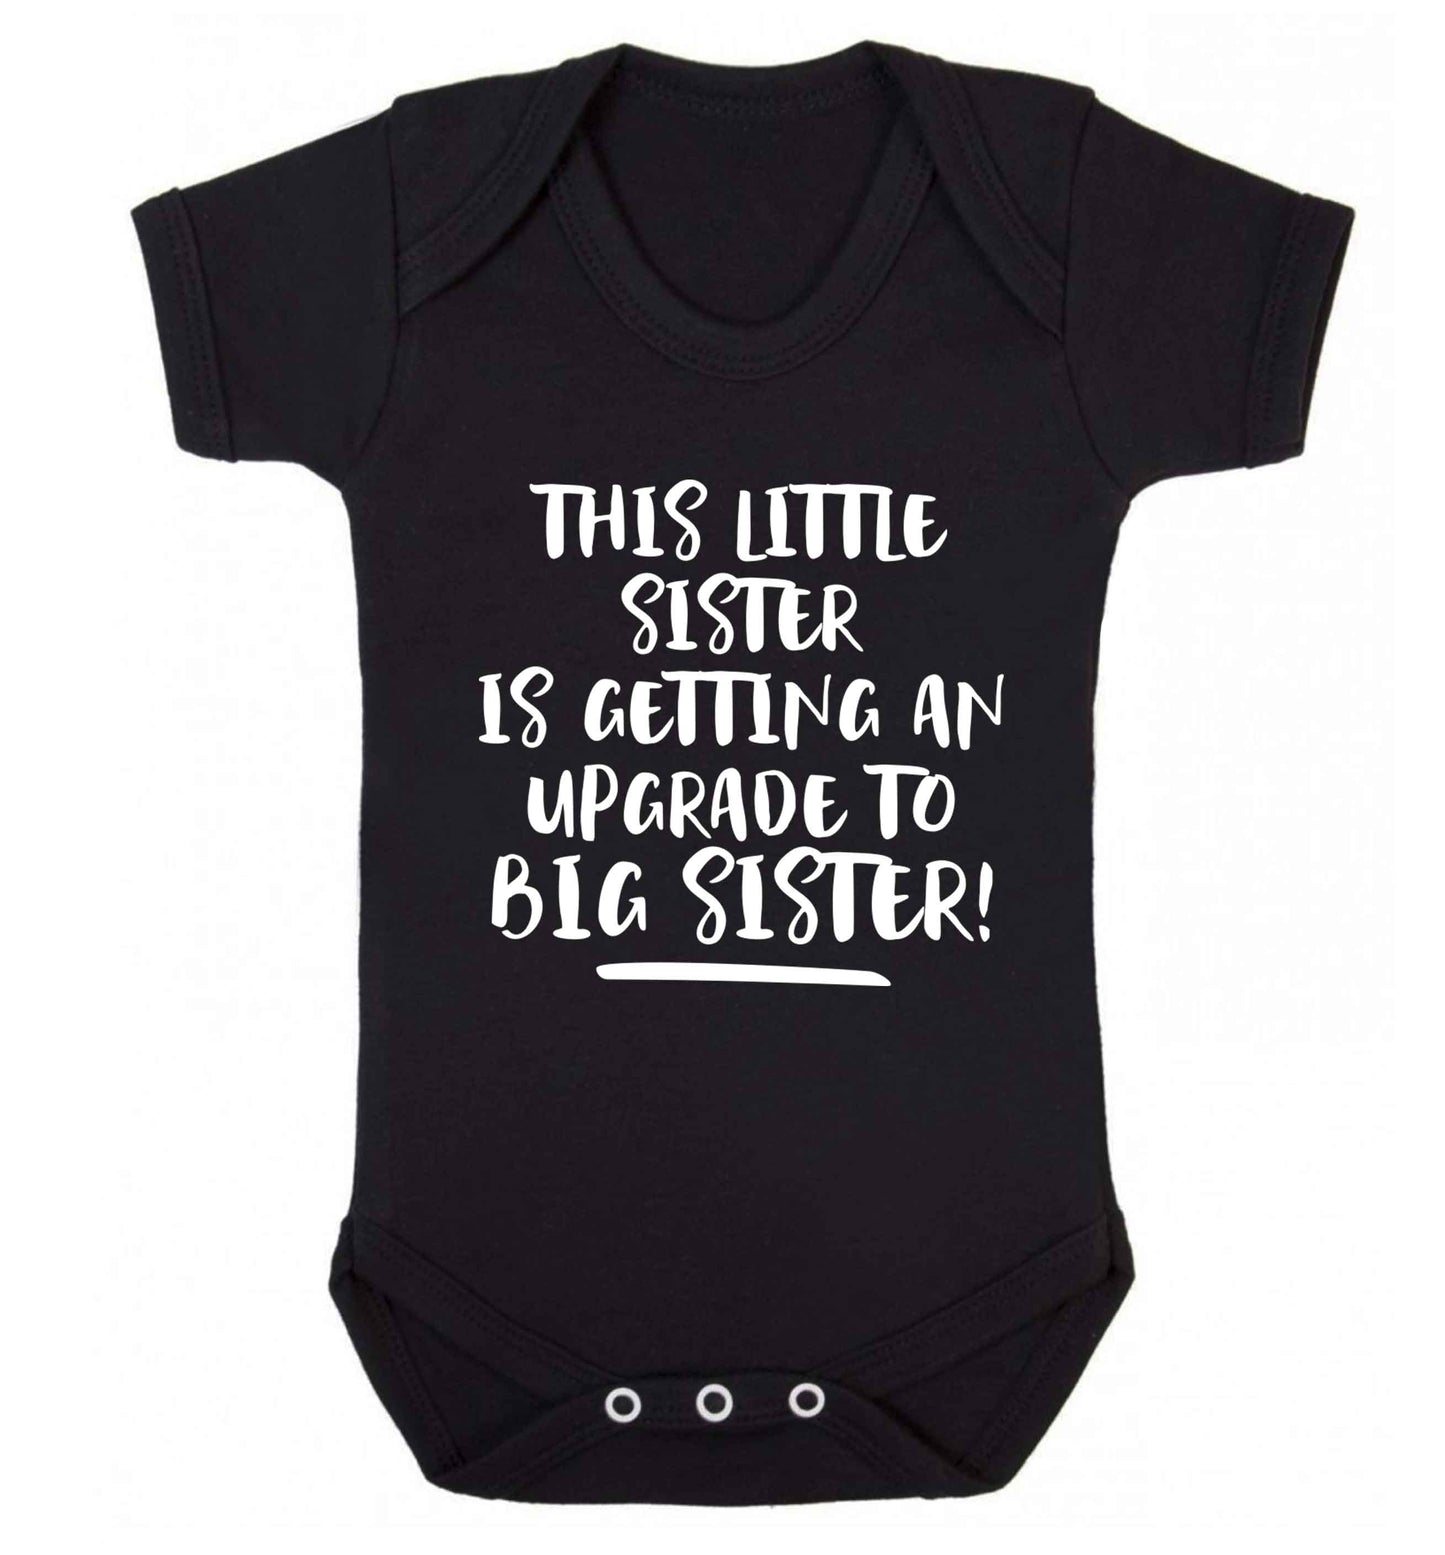 This little sister is getting an upgrade to big sister! Baby Vest black 18-24 months